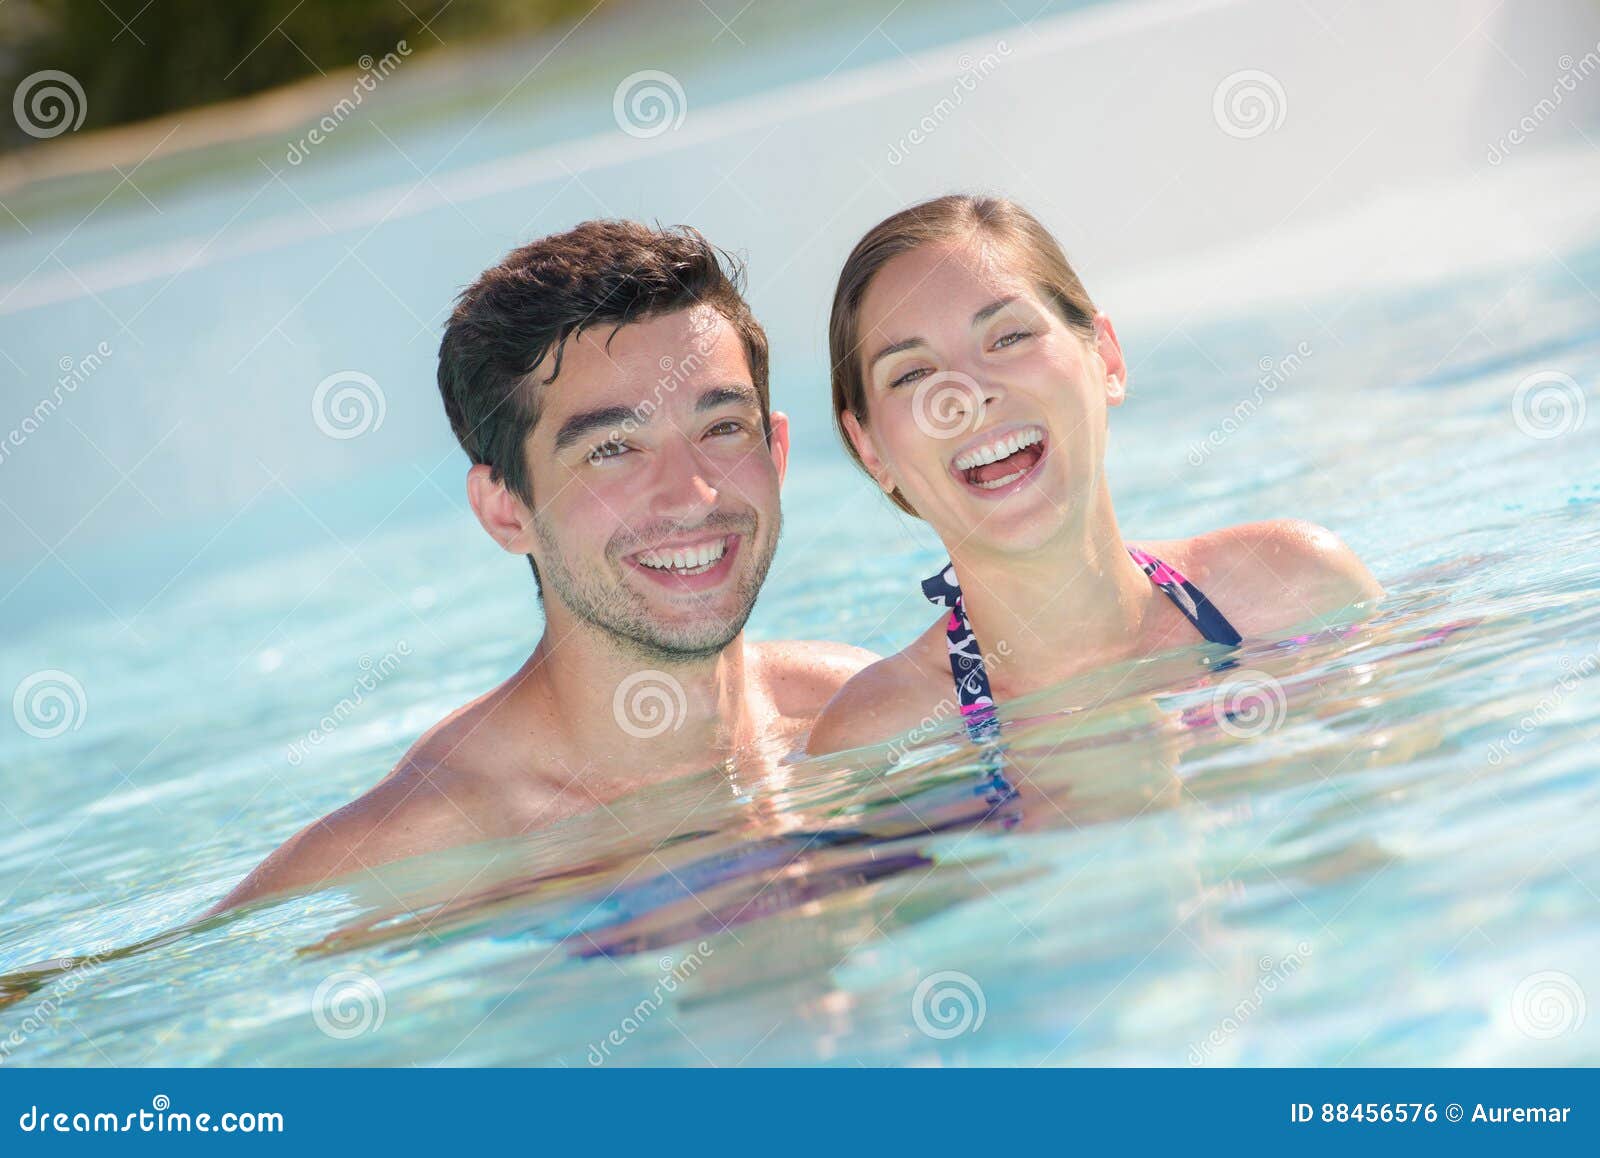 happy vacationer in swimming pool